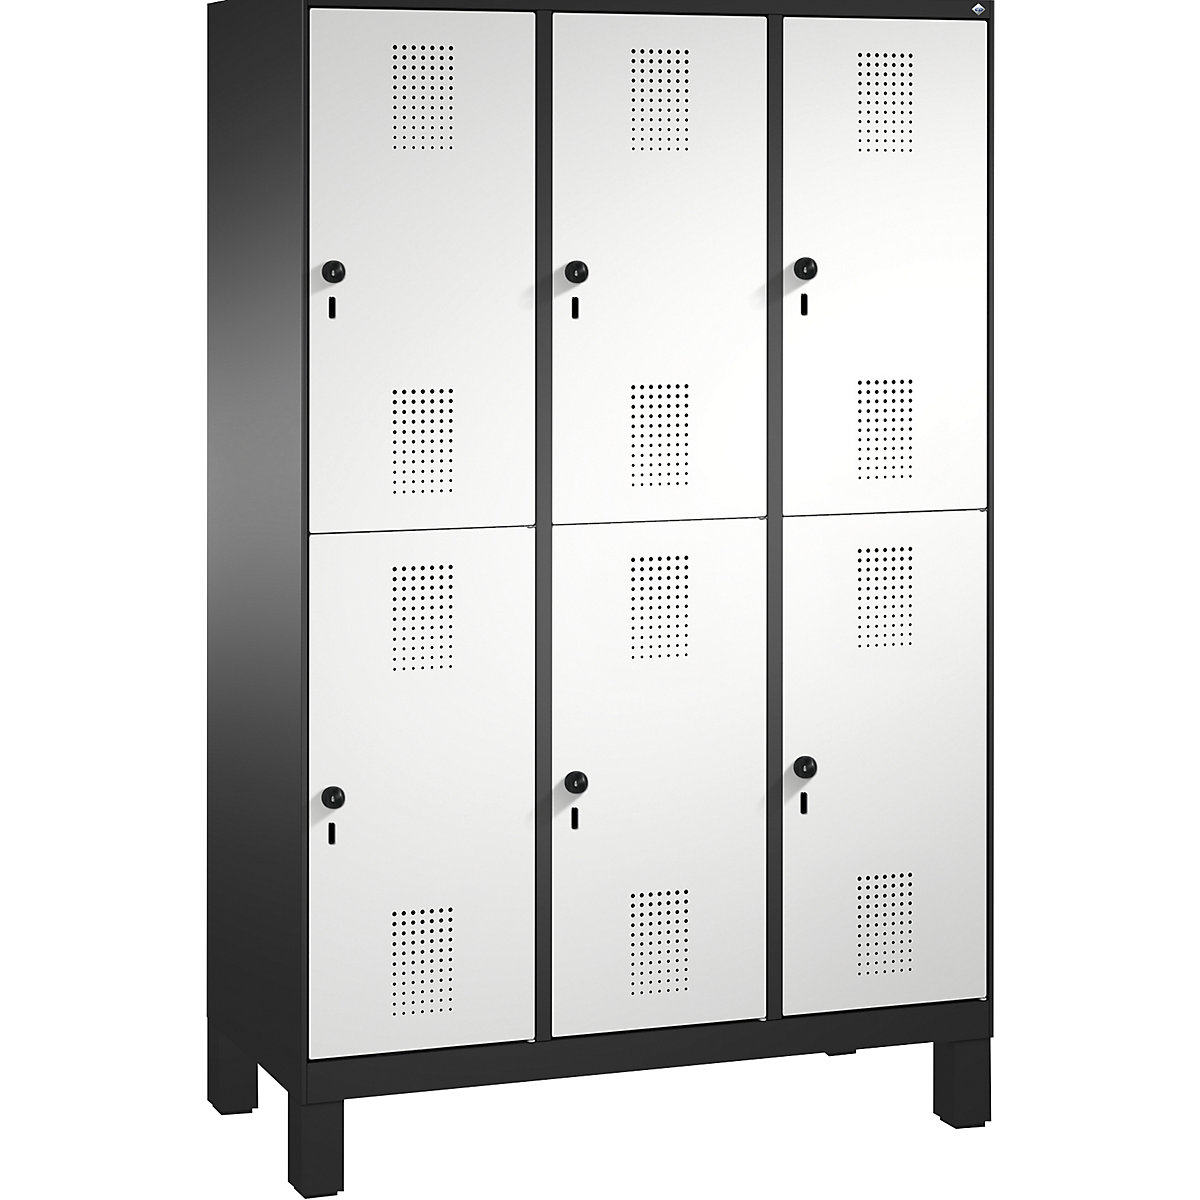 EVOLO cloakroom locker, double tier, with feet – C+P, 3 compartments, 2 shelf compartments each, compartment width 400 mm, black grey / light grey-12